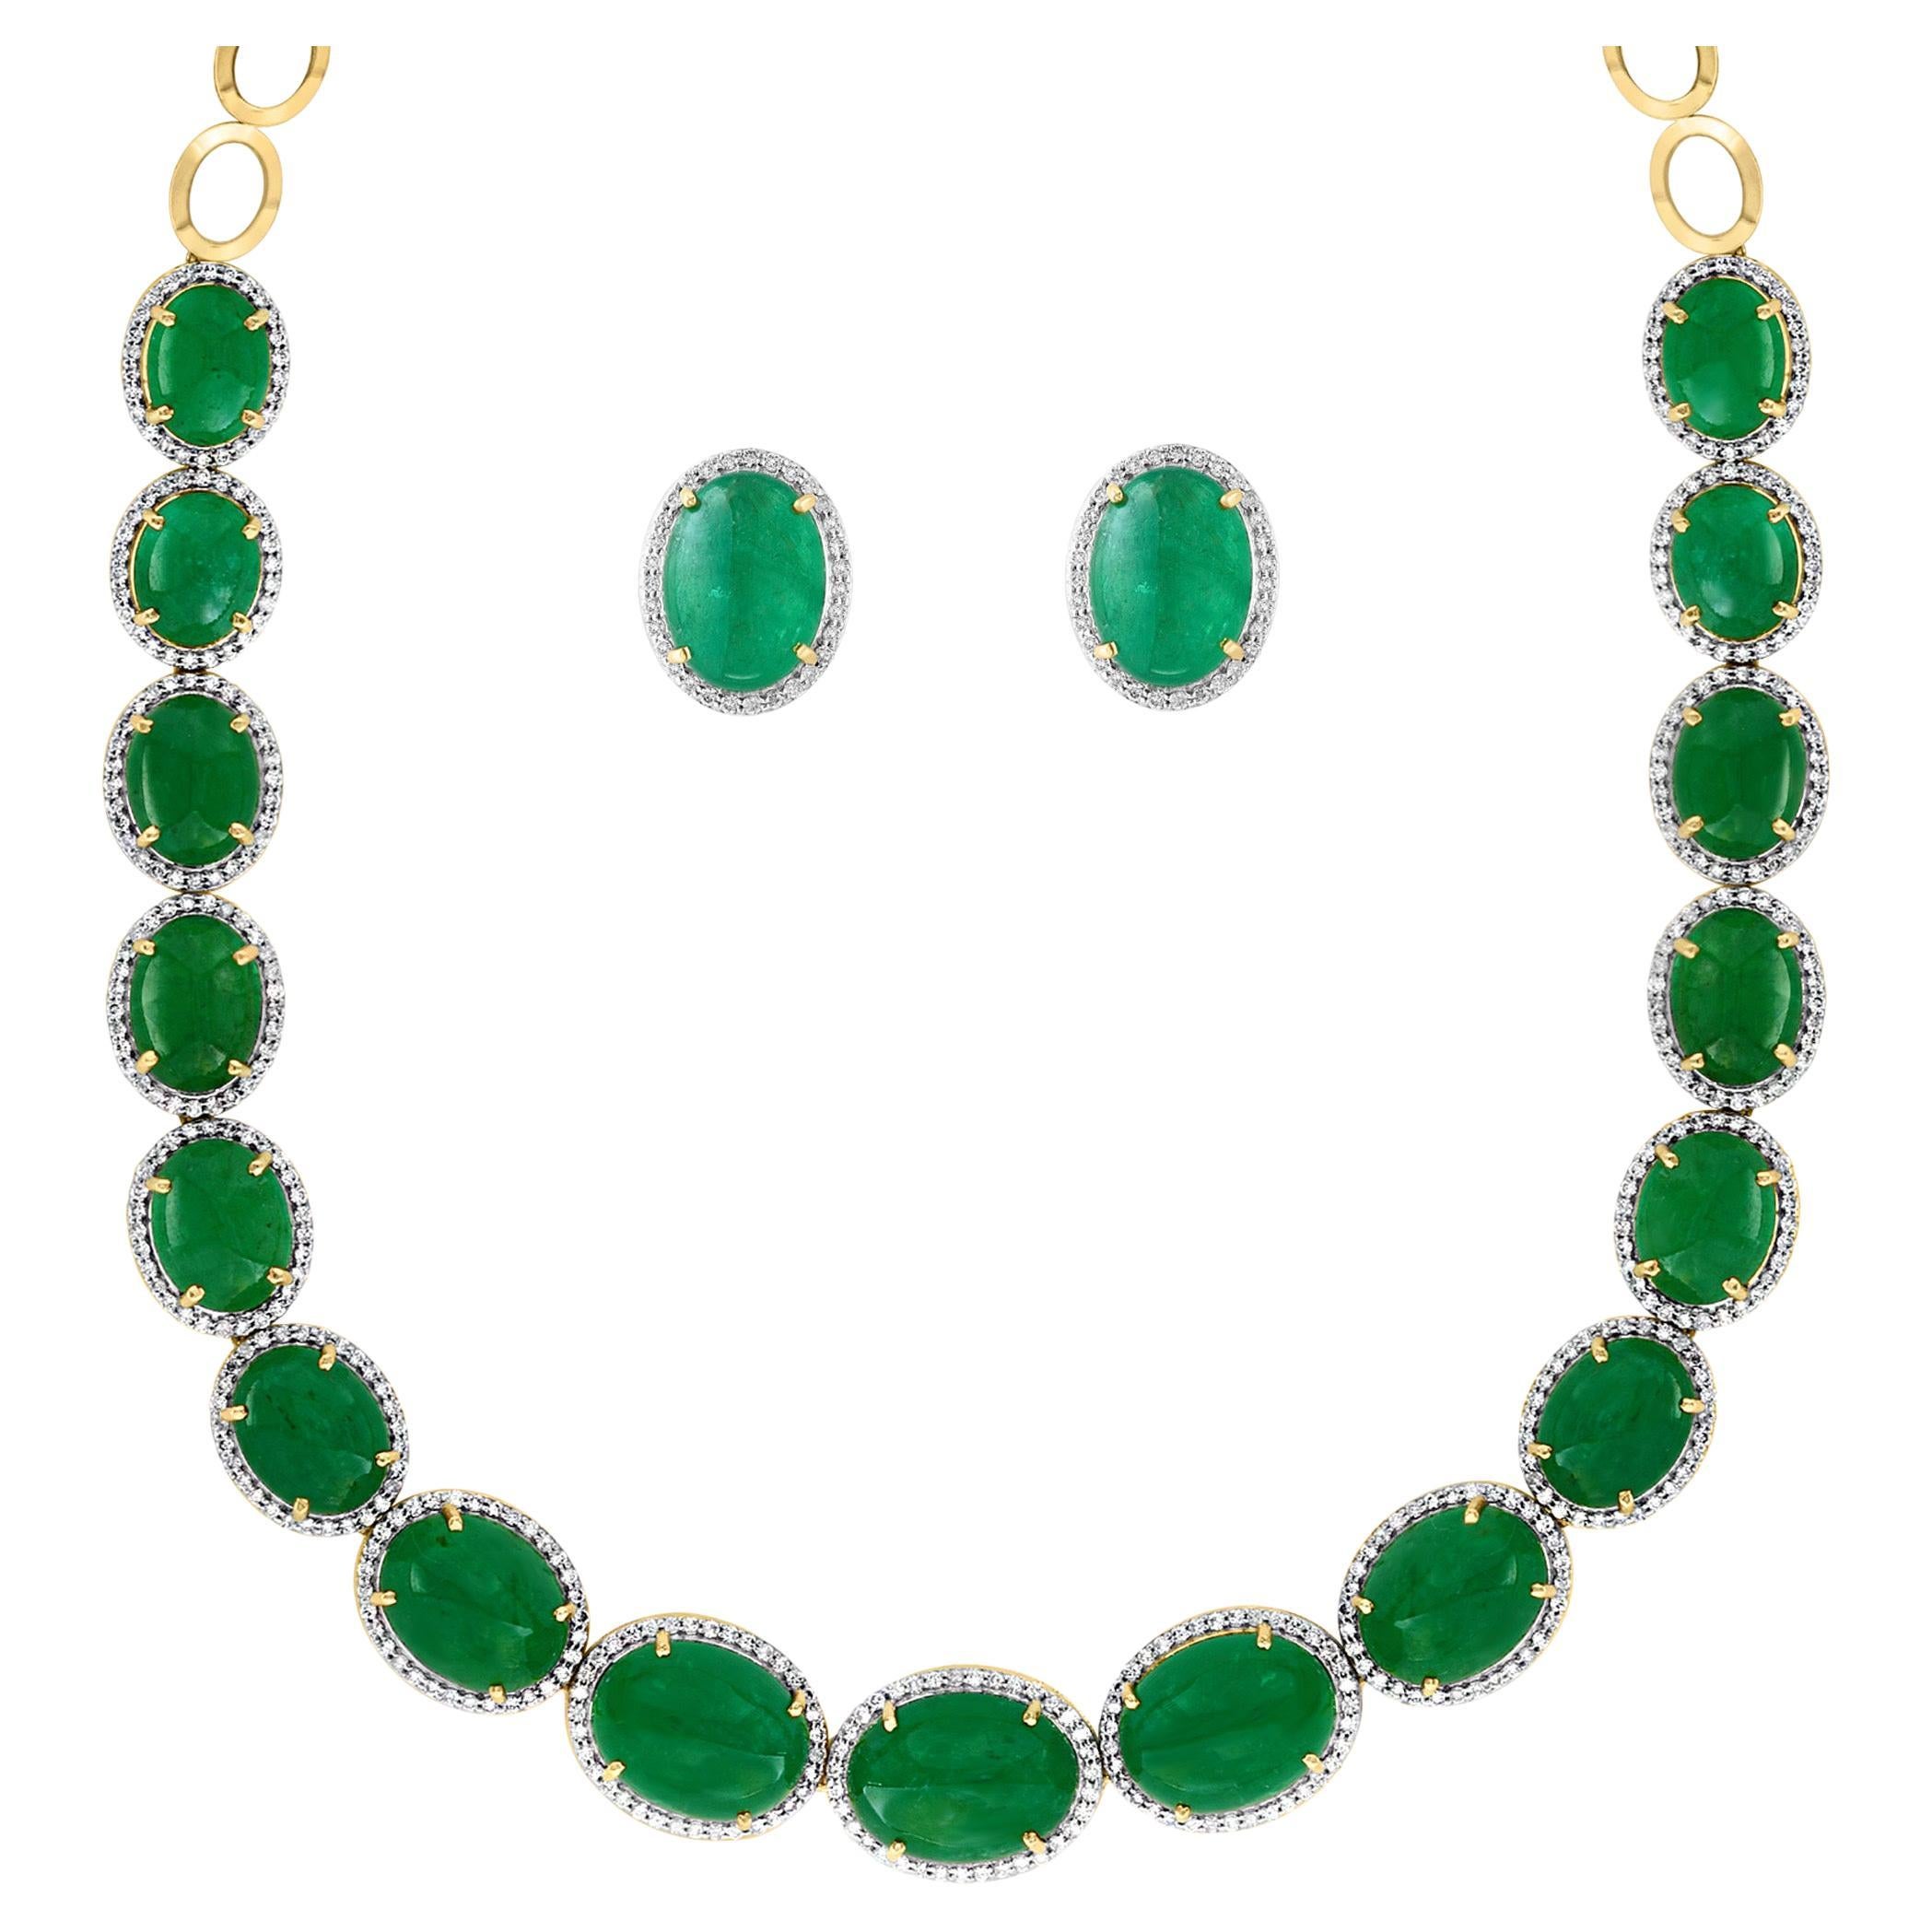 110 Ct Oval Natural Cabochon Emerald & Diamond Necklace, Earring Suite 14 K Gold For Sale